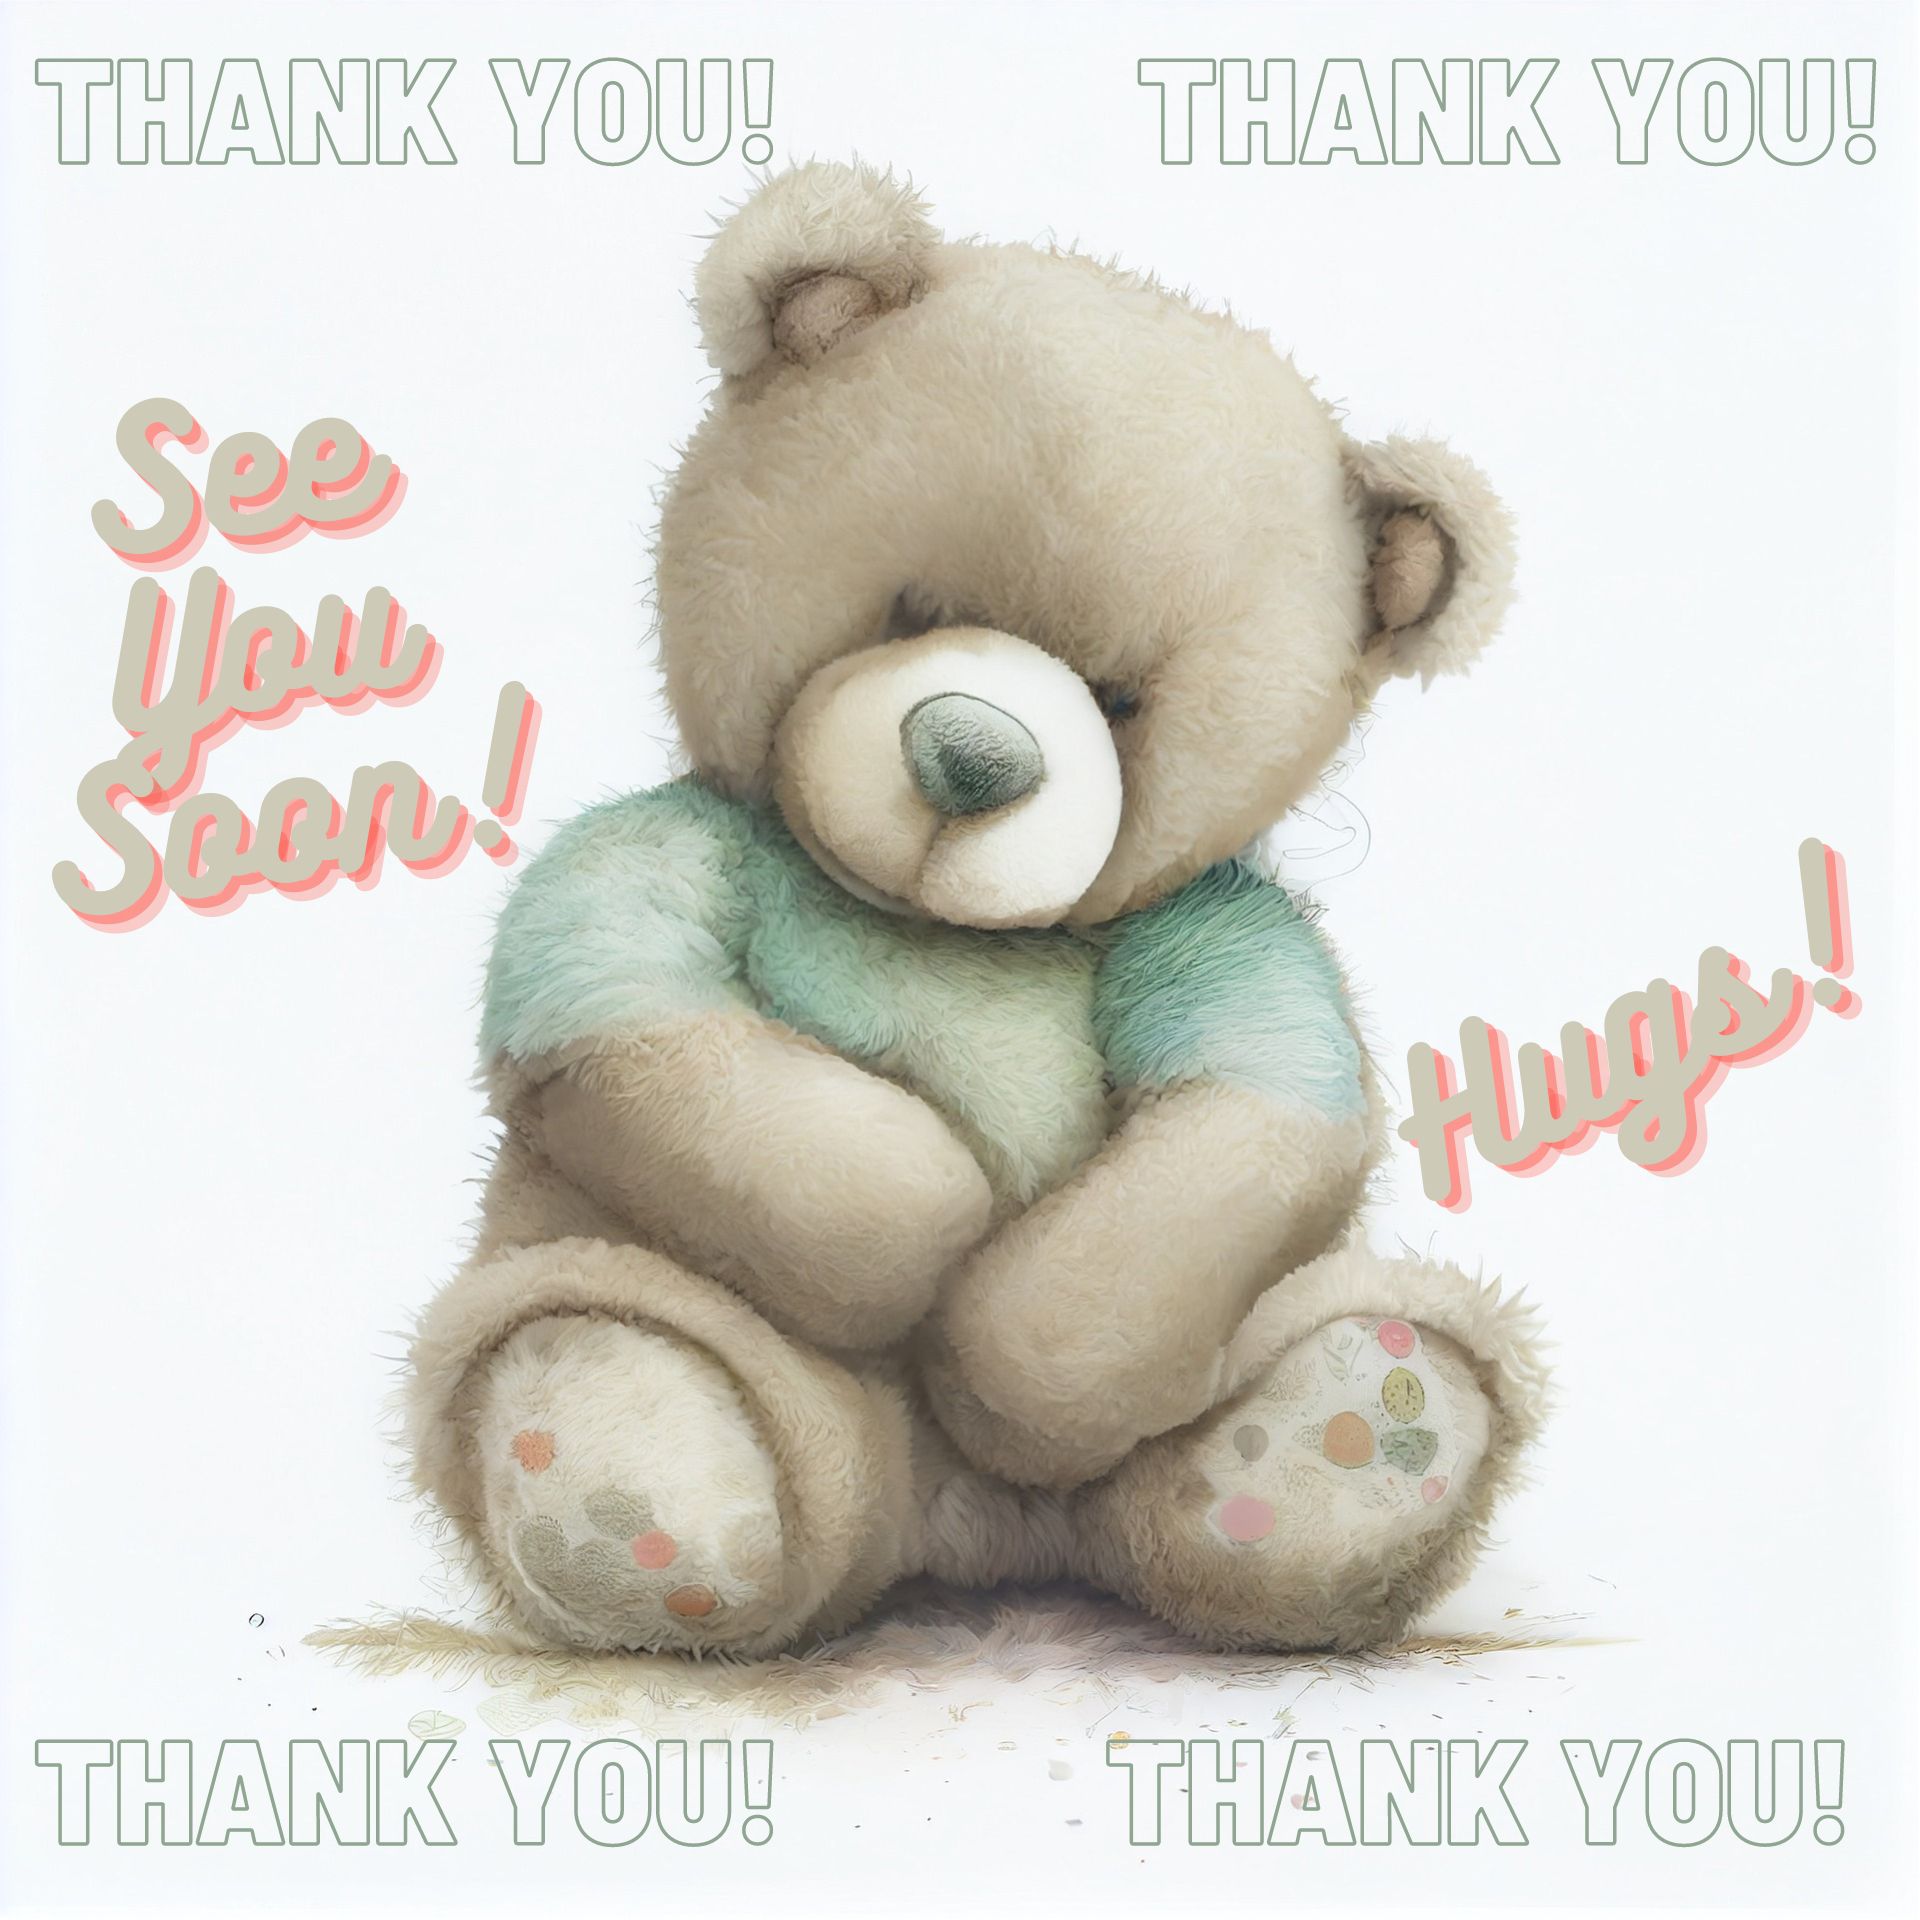 Cute teddy bear with Thank You, See You Soon, and Hugs! captions